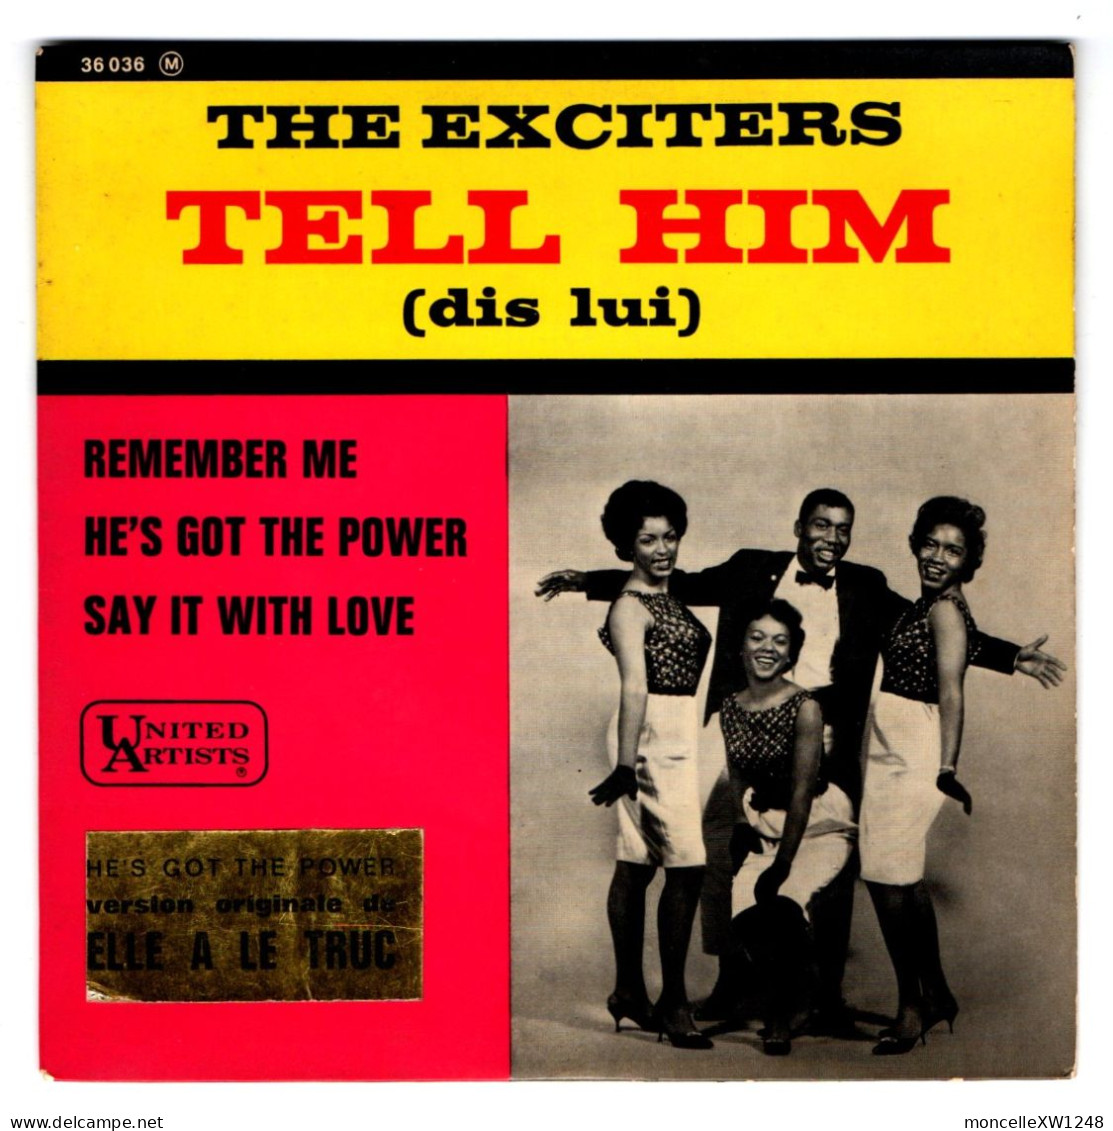 The Exciters - 45 T EP Tell Him (1963) - 45 G - Maxi-Single